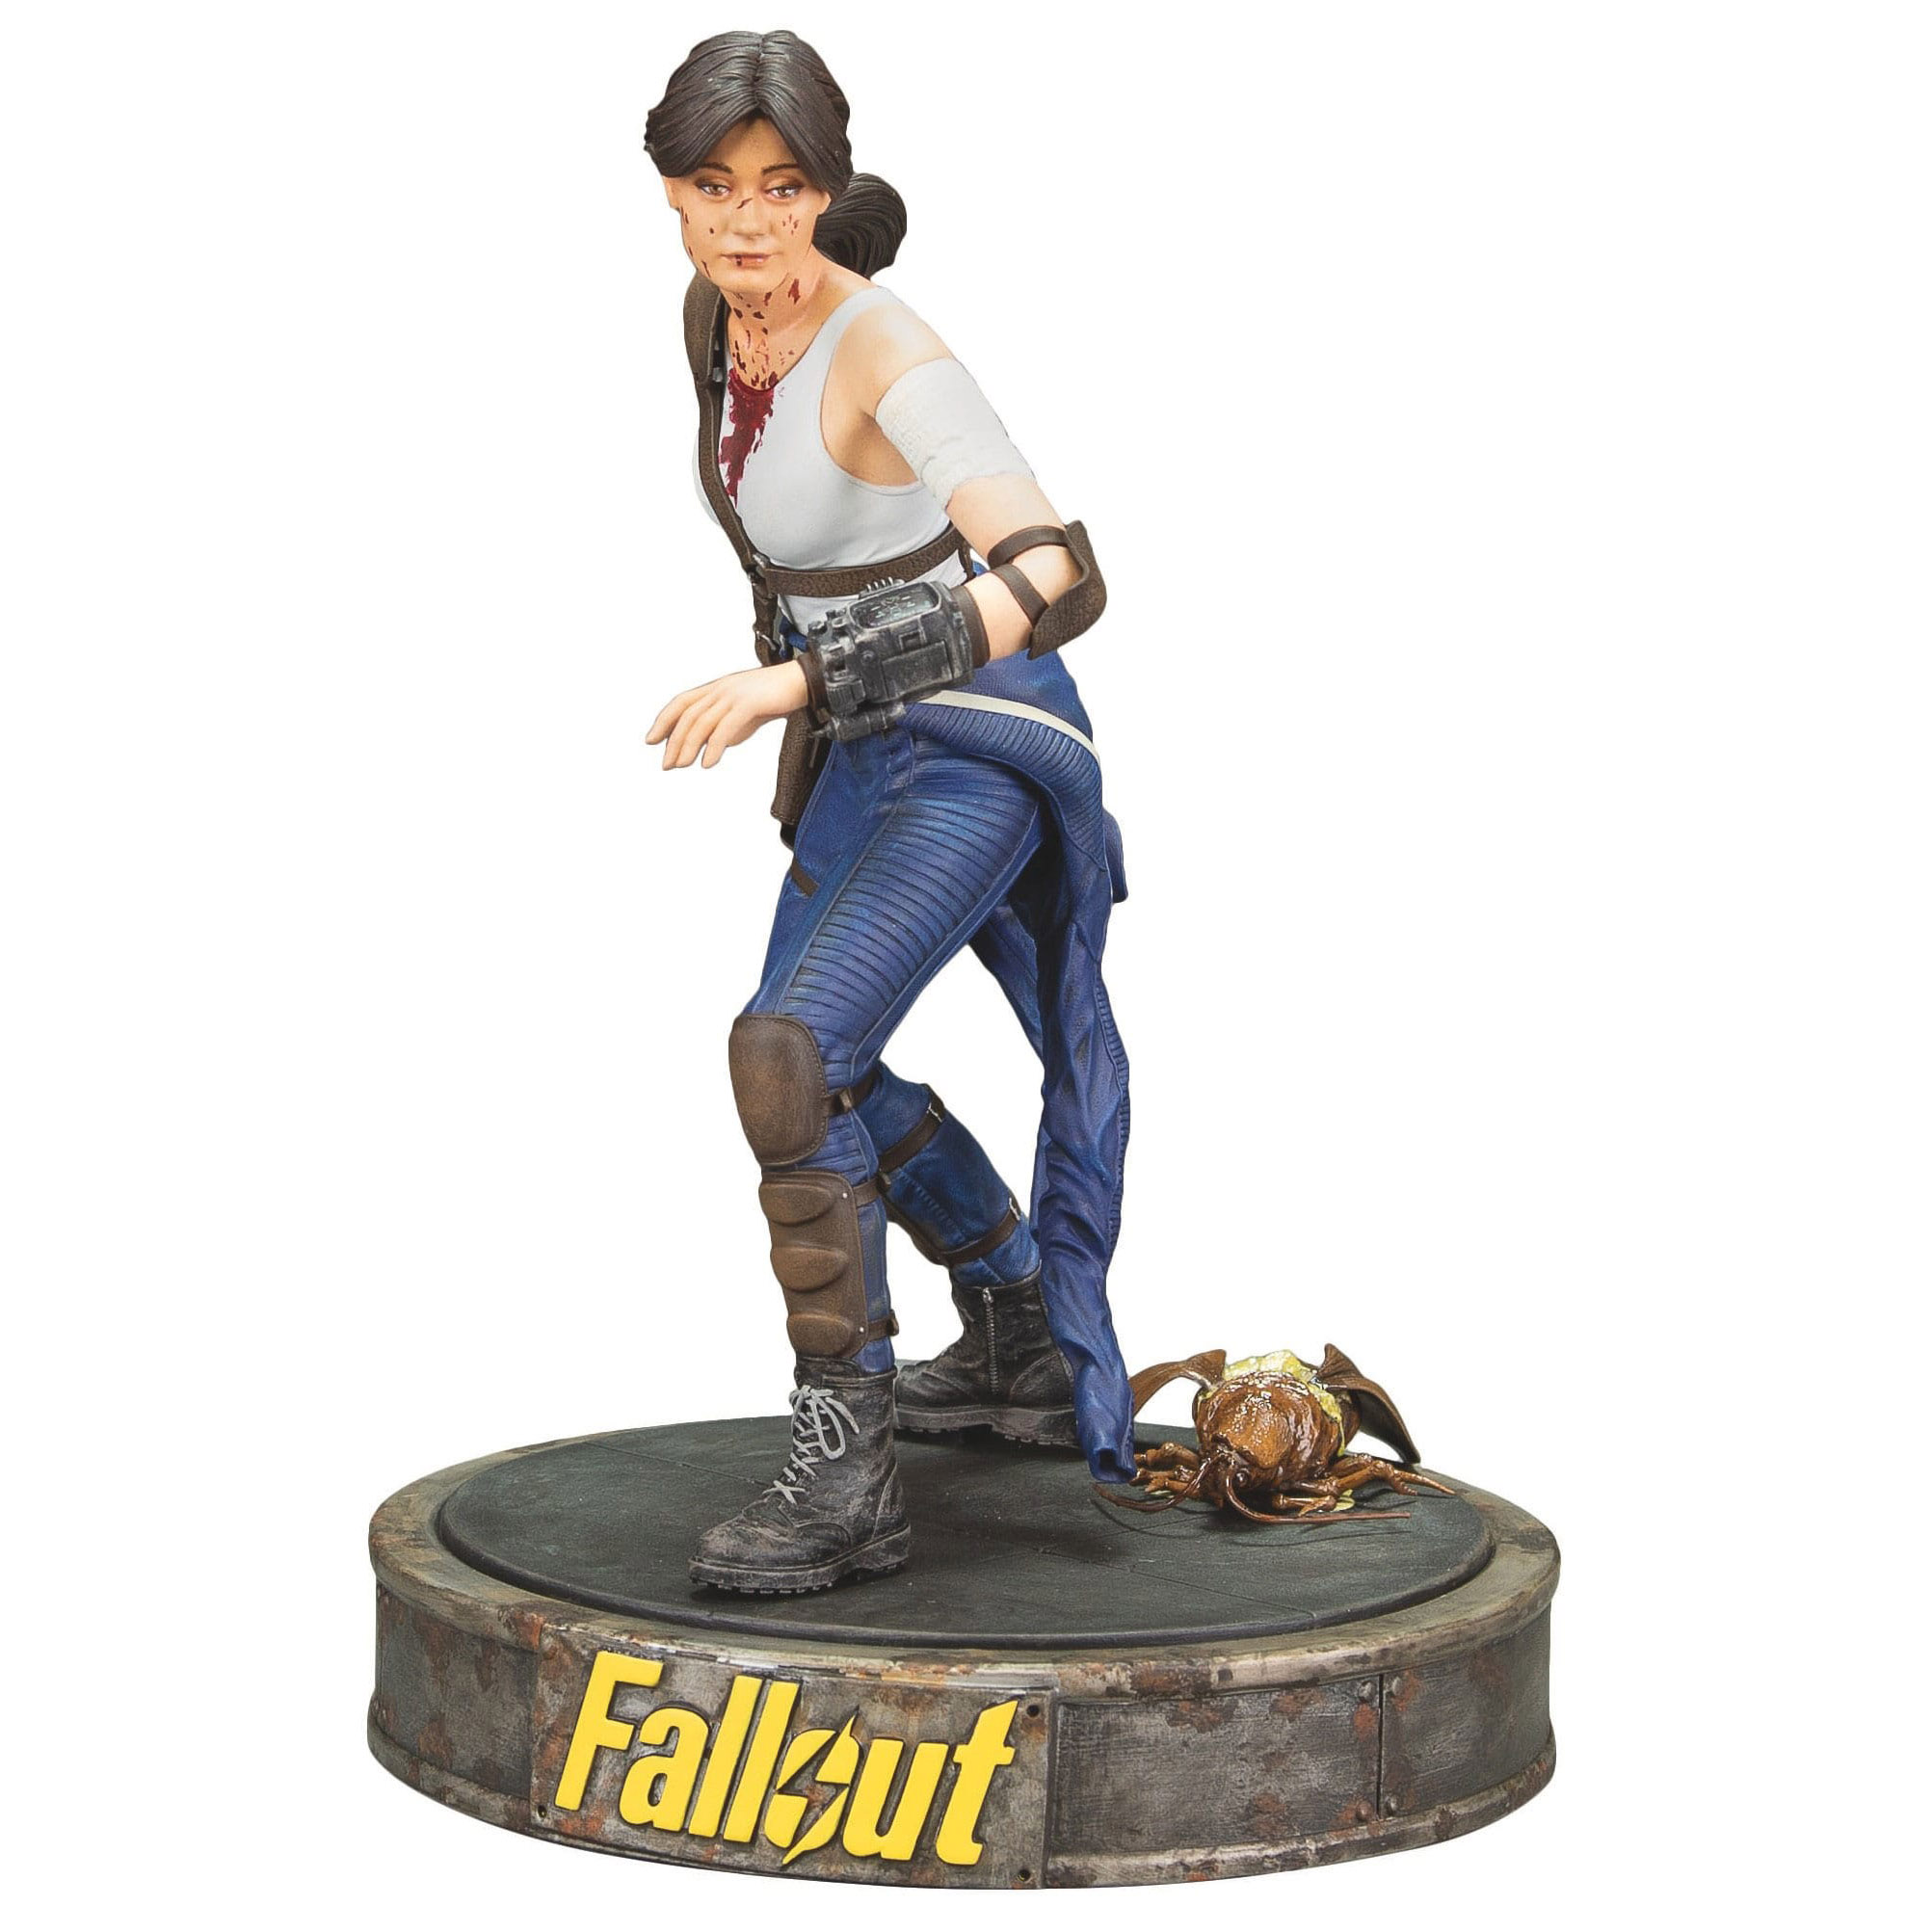 Fallout Serie: Lucy Statue (PreORDER]